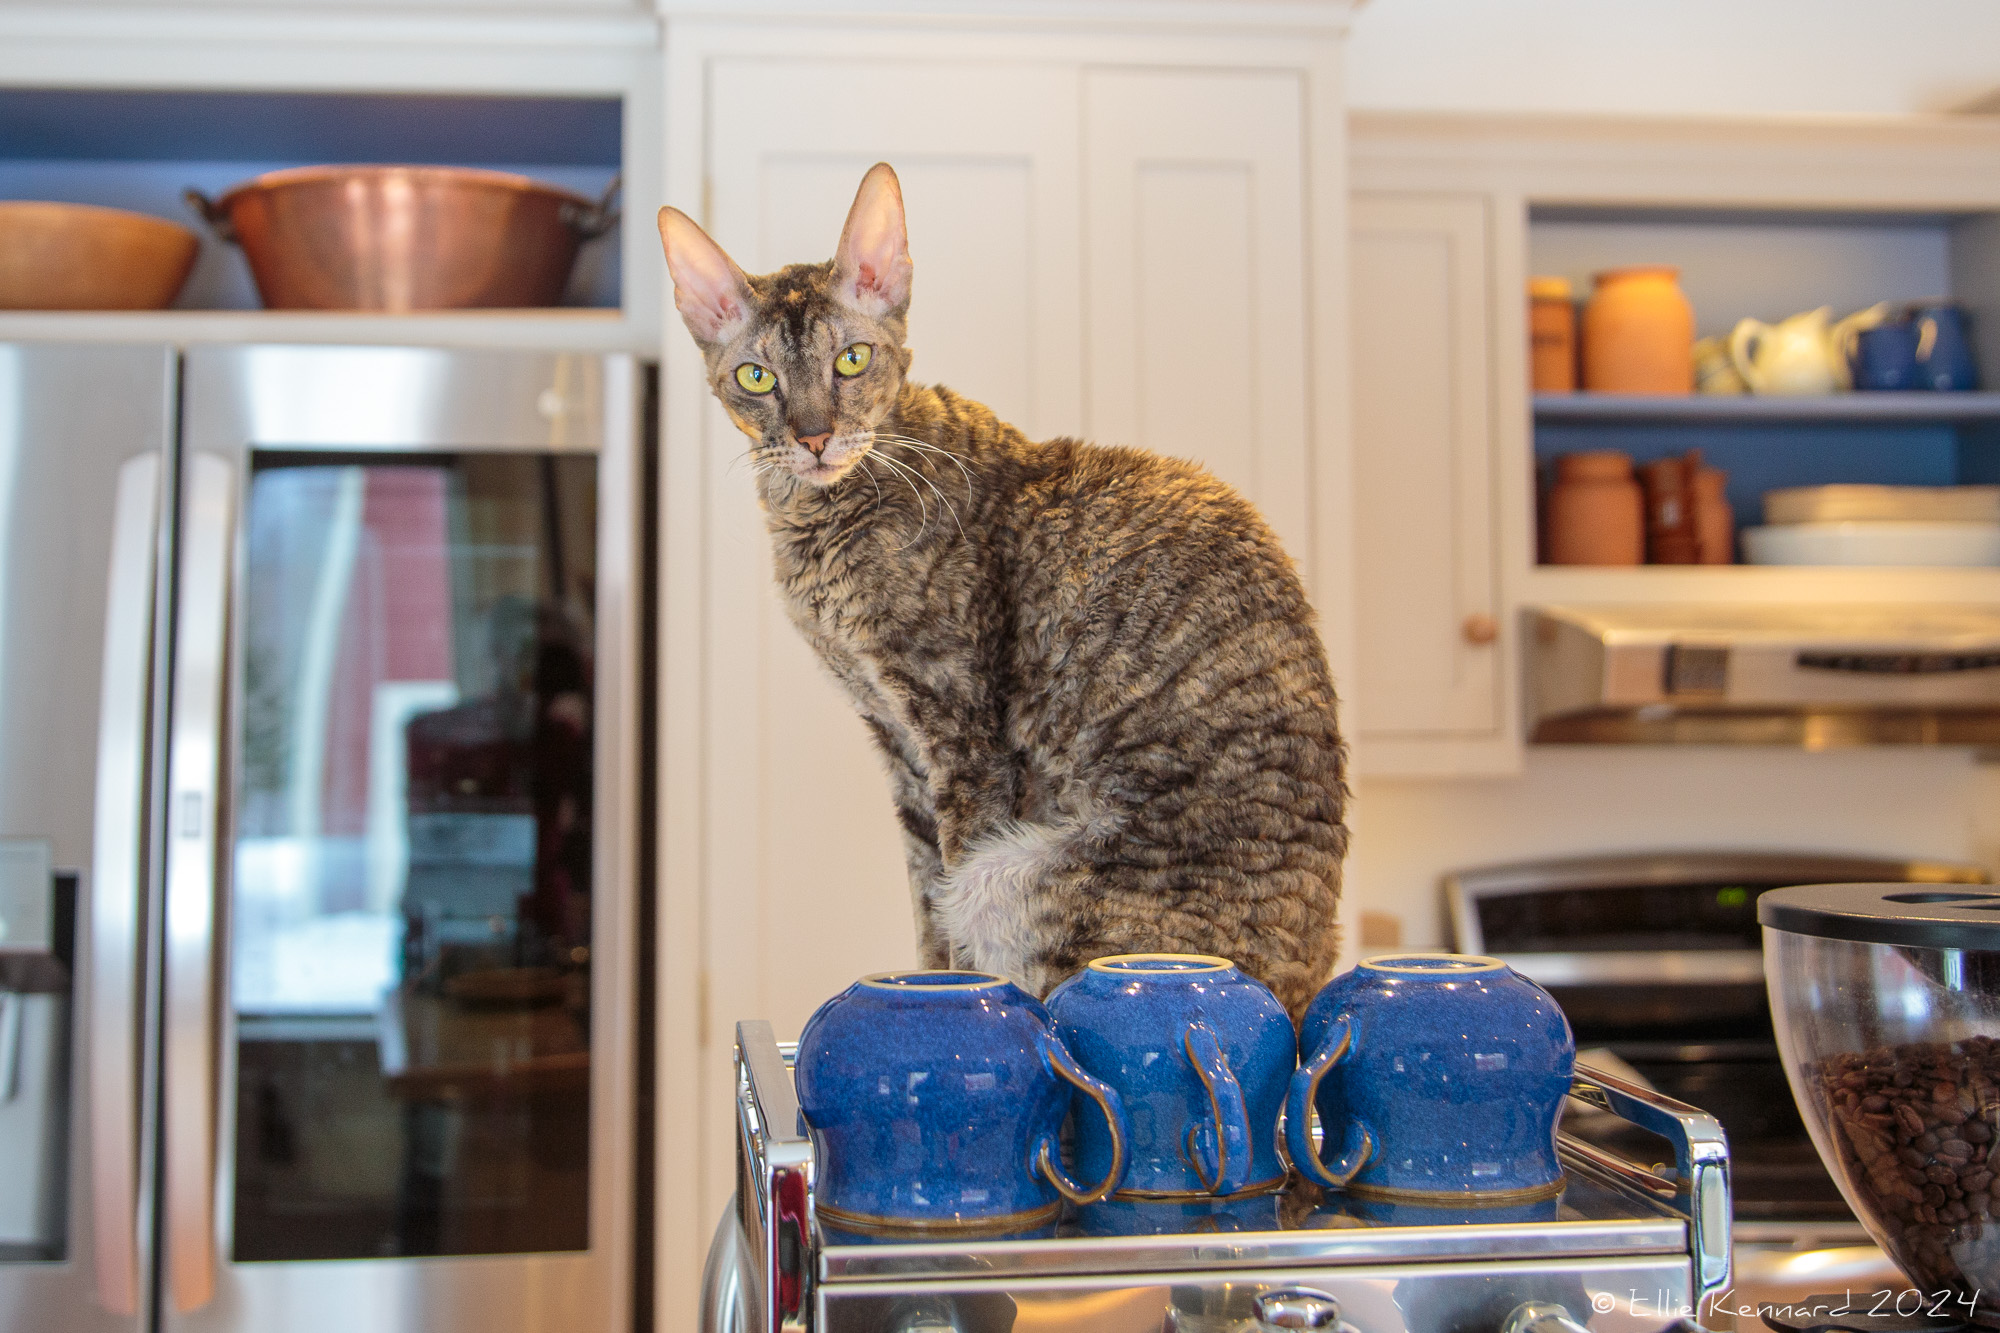 A brown, cream and black tabby cat with curly hair and big ears is sitting on a coffee machine behind 3 blue coffee mugs that are upside down to wrarm. She is looking directly at the camera with her yellow eyes.